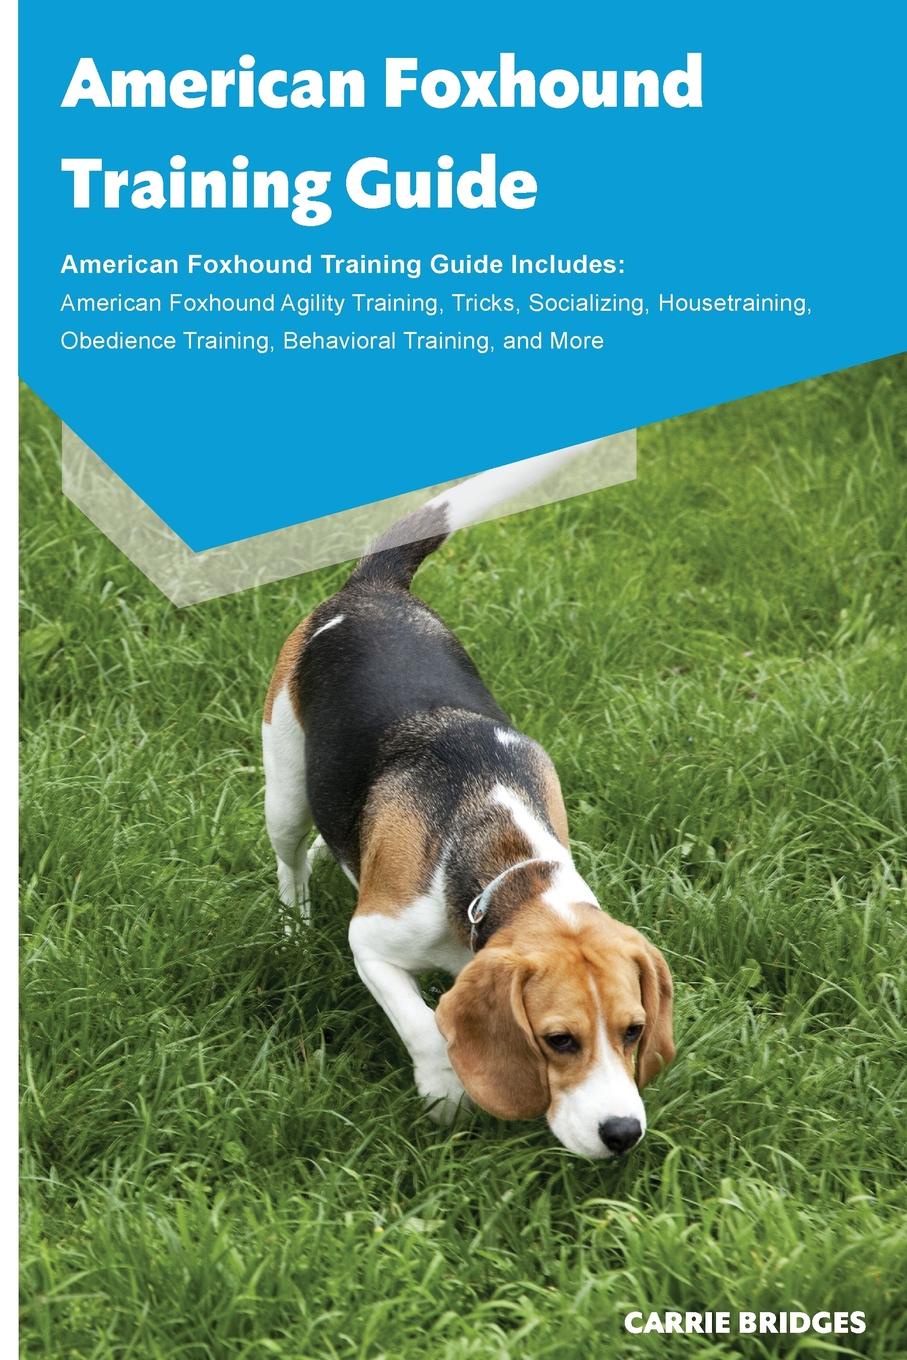 American Foxhound Training Guide American Foxhound Training Guide Includes. American Foxhound Agility Training, Tricks, Socializing, Housetraining, Obedience Training, Behavioral Training, and More